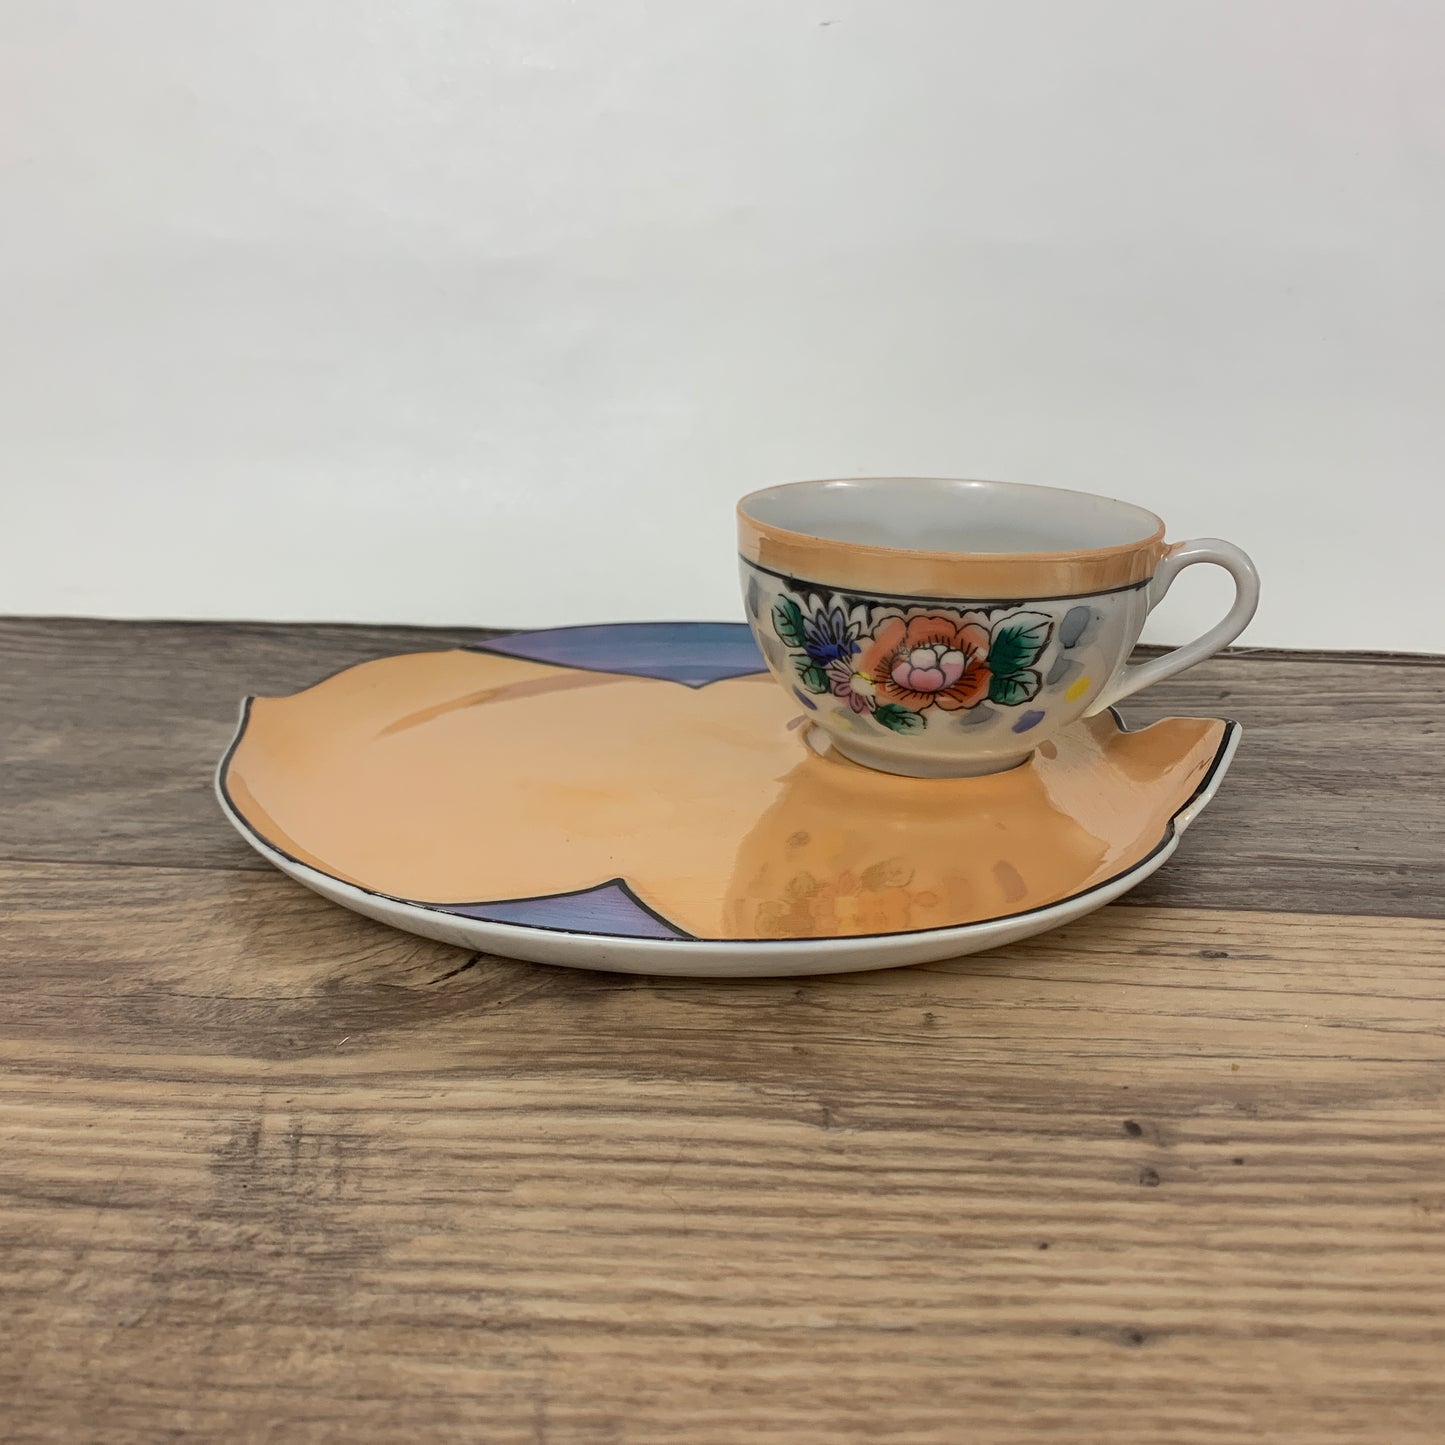 Vintage Japan Luster Ware Tea Cup and Snack Plate